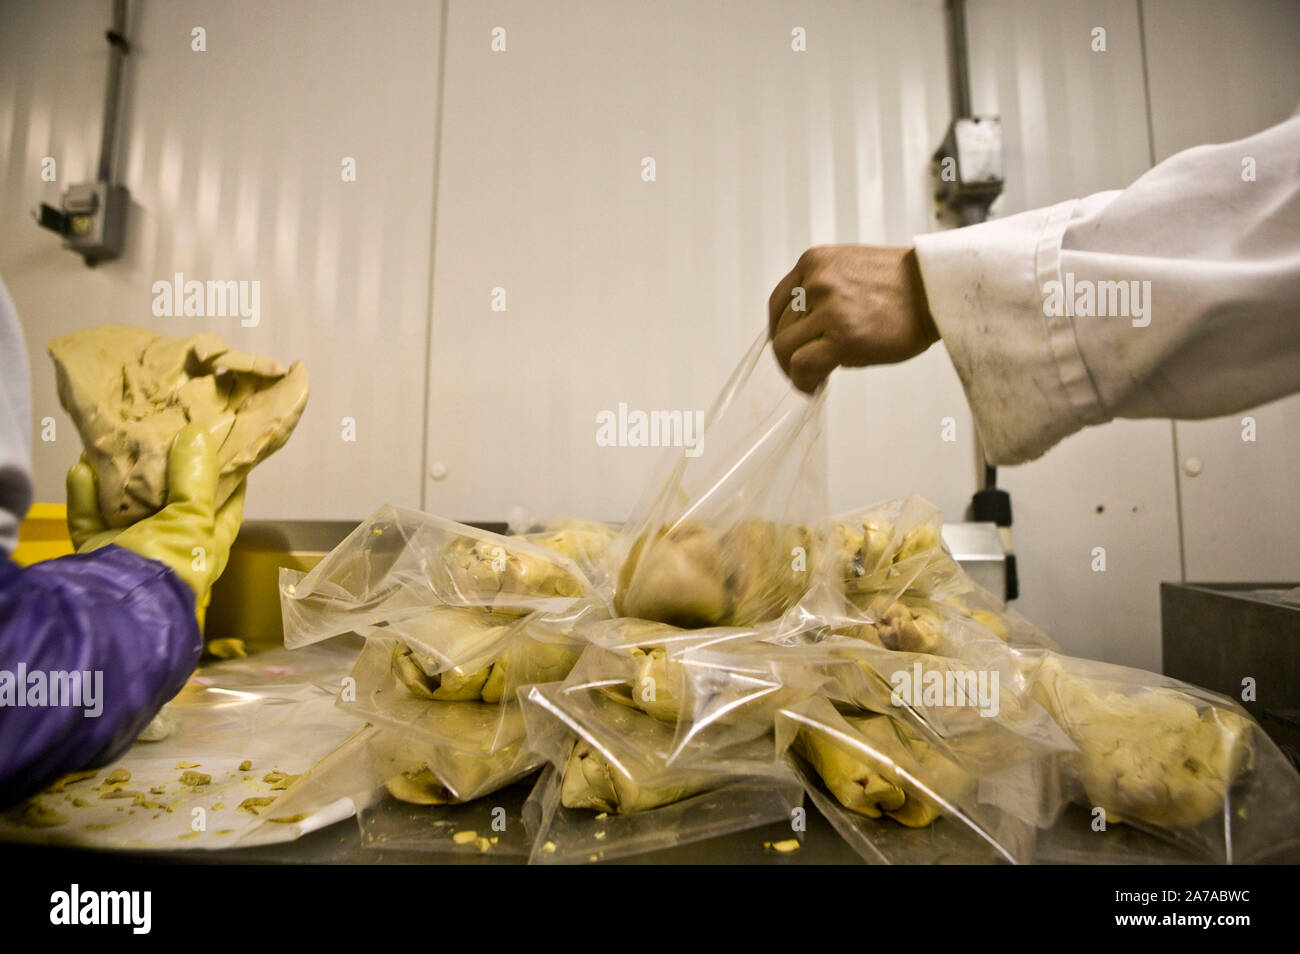 Workers package duck fatty livers at the Hudson Valley Foie Gras farm in Ferndale, USA, 16 March 2006. Stock Photo